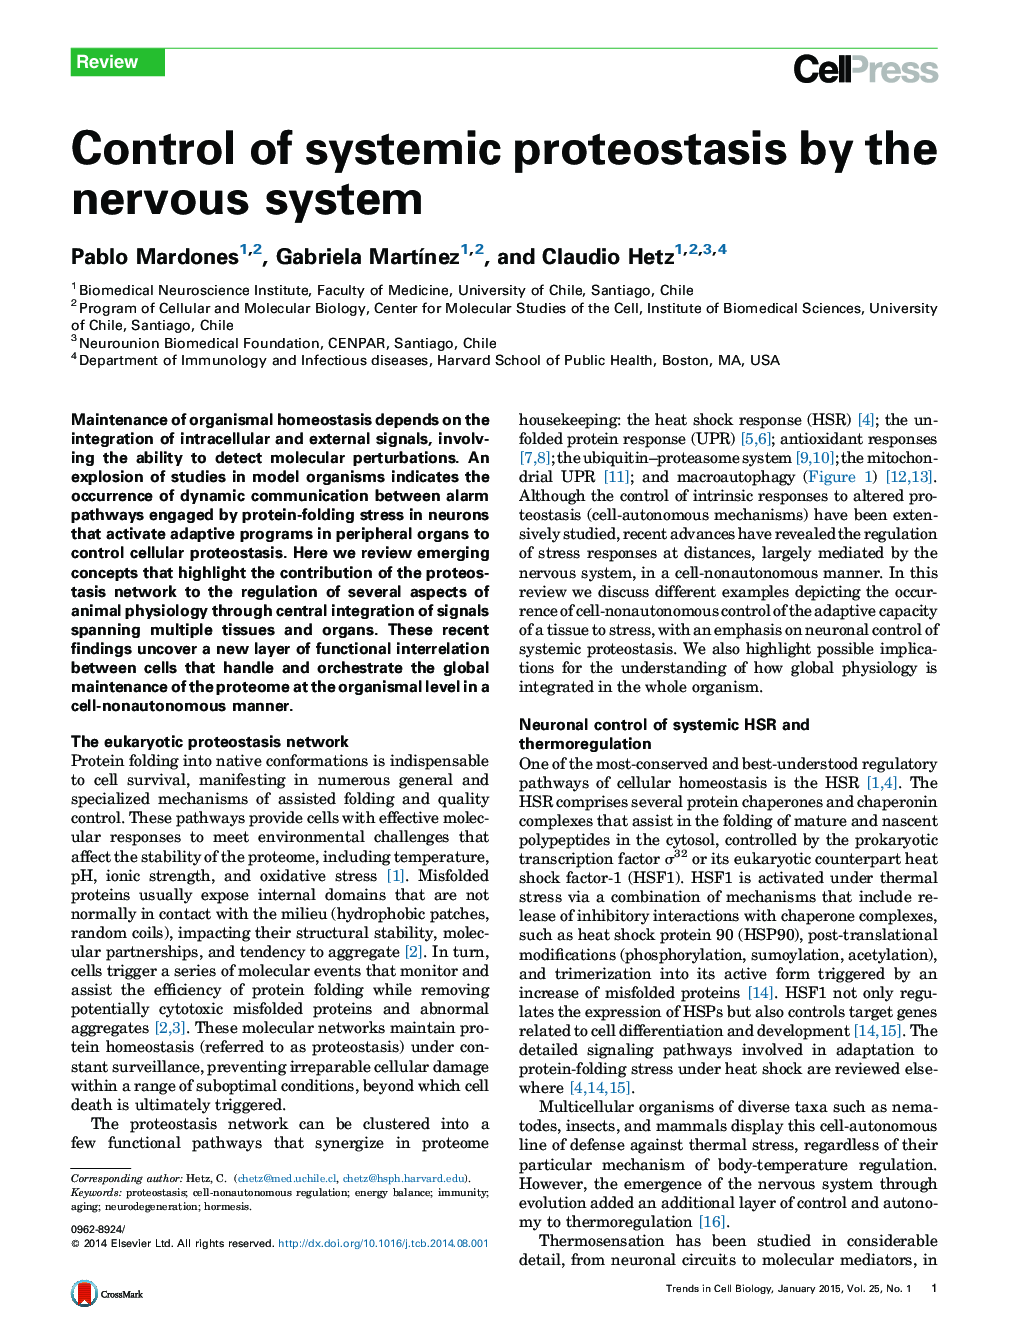 Control of systemic proteostasis by the nervous system